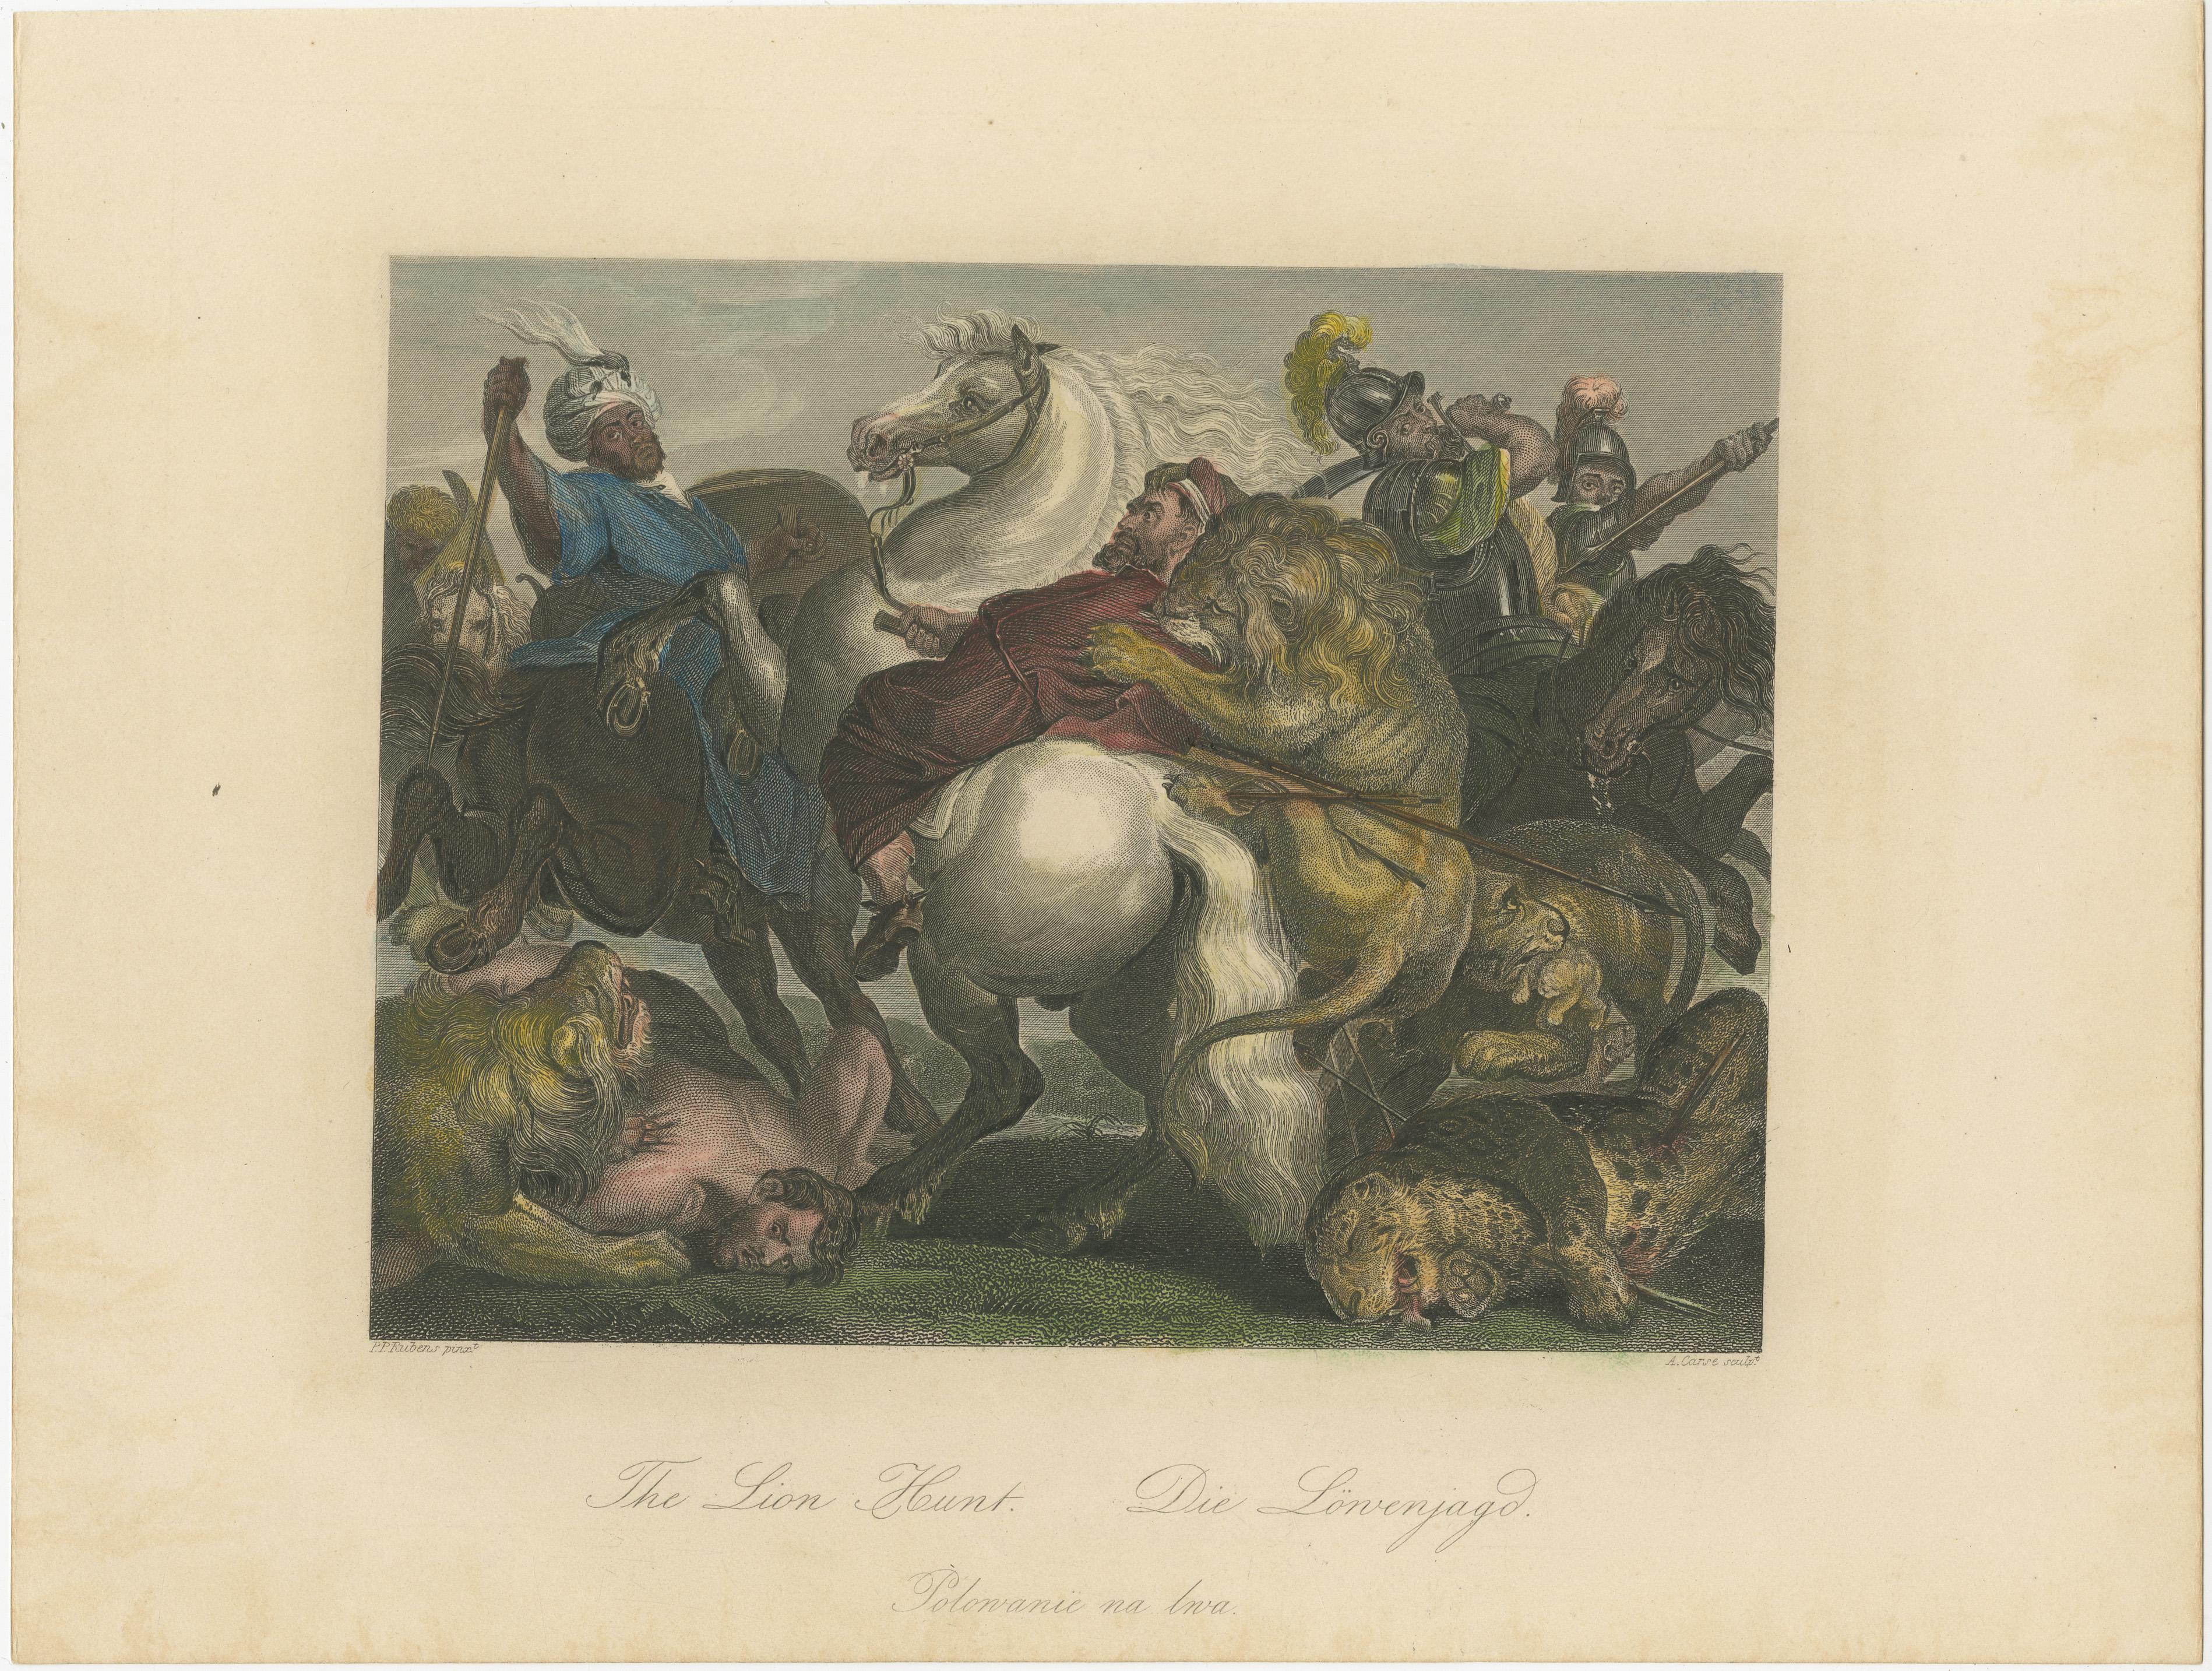 Antique print titled 'The Lion Hunt - Die Löwenjagd'. Steel engraving by Carse, engraved after a painting by P.P. Rubens. Published circa 1850. 

The Lion Hunt is a 1621 painting by Peter Paul Rubens, now held in the Alte Pinakothek in Munich. It